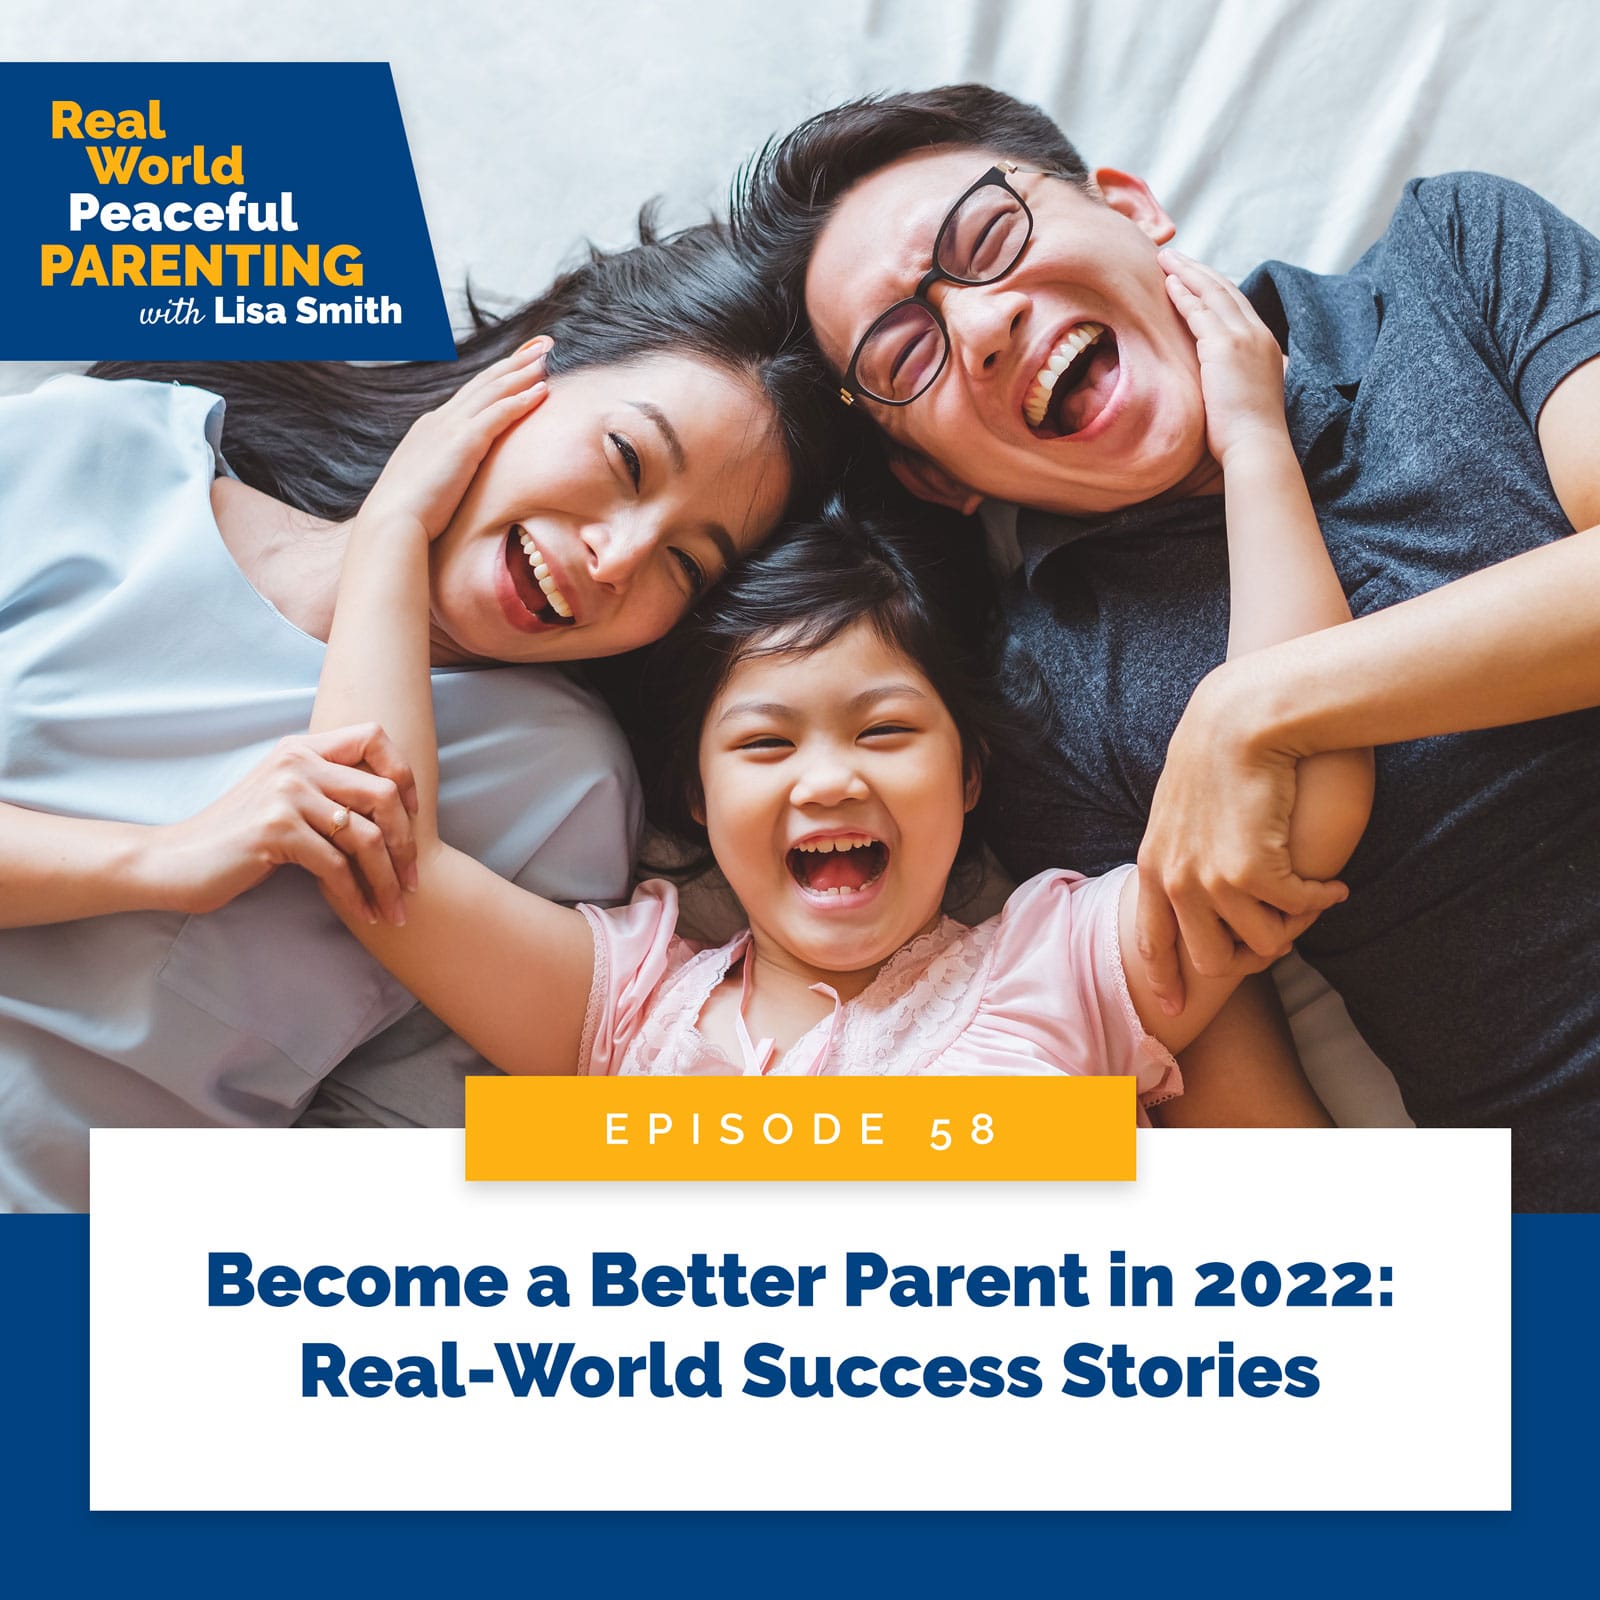 Real World Peaceful Parenting with Lisa Smith | Become a Better Parent in 2022: Real-World Success Stories